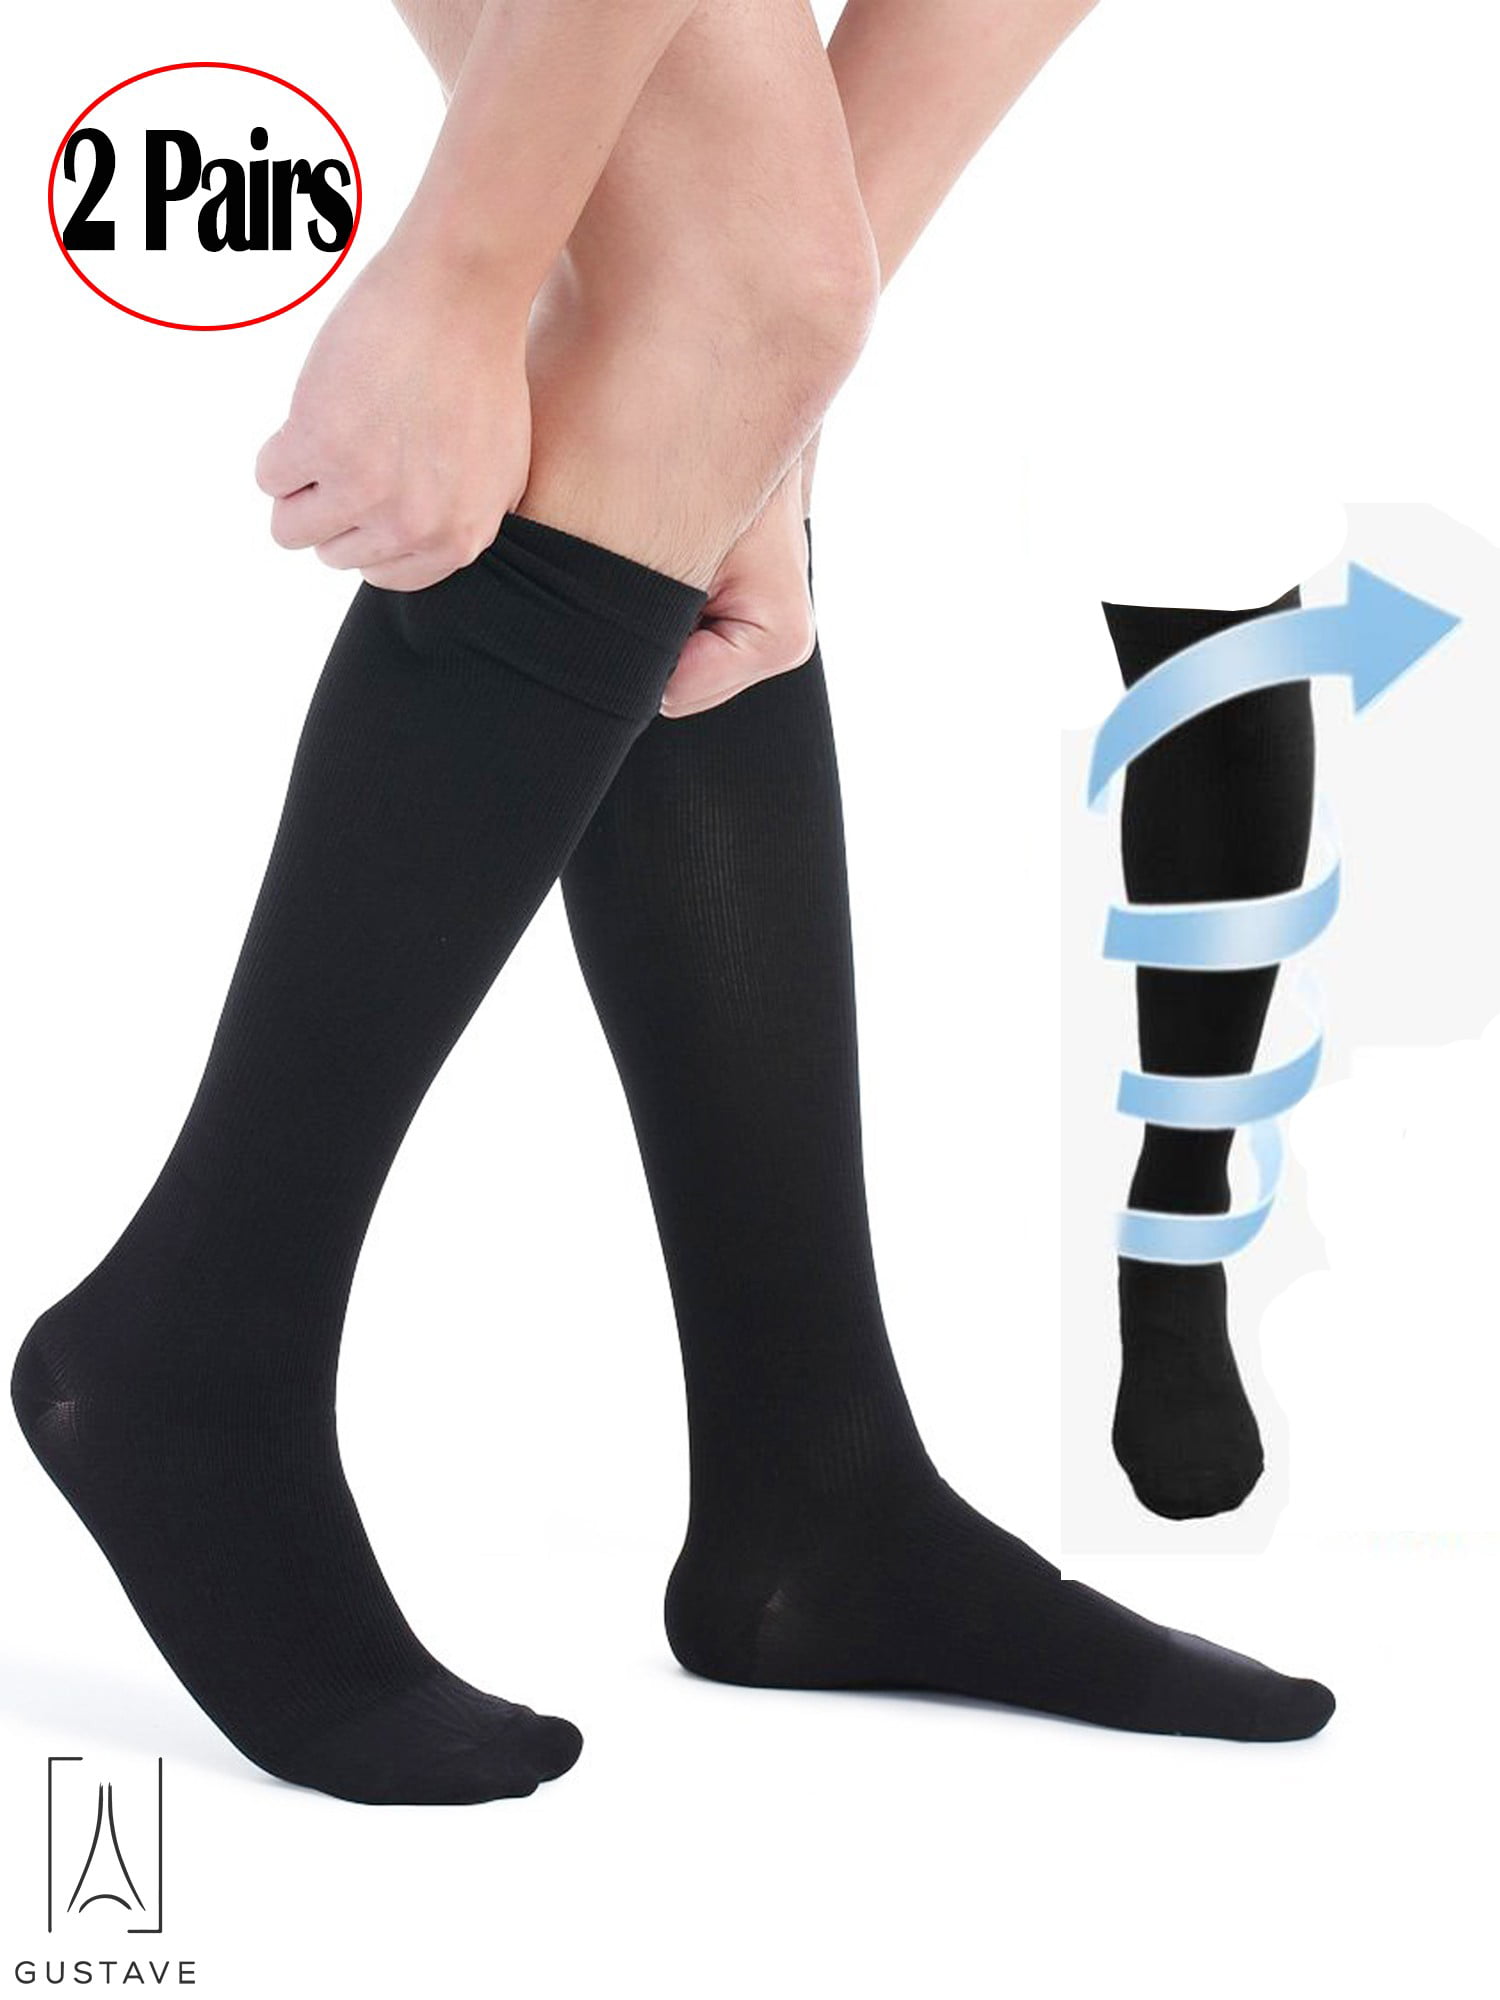 GustaveDesign 2 Pairs Knee-High Compression Socks Pain Relief Calf Leg ...